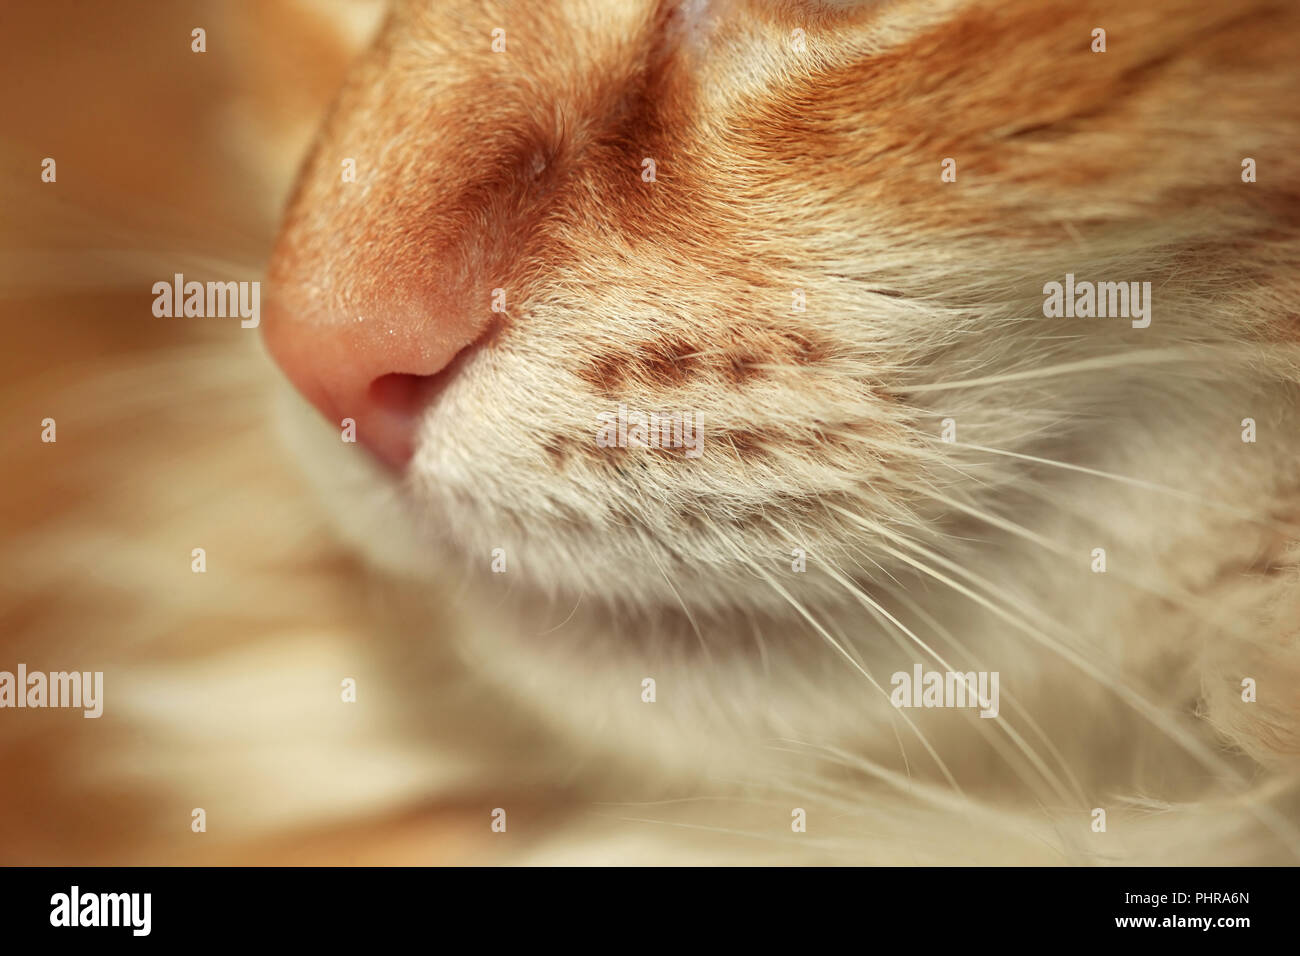 Close-up of a nose of a red cat Stock Photo